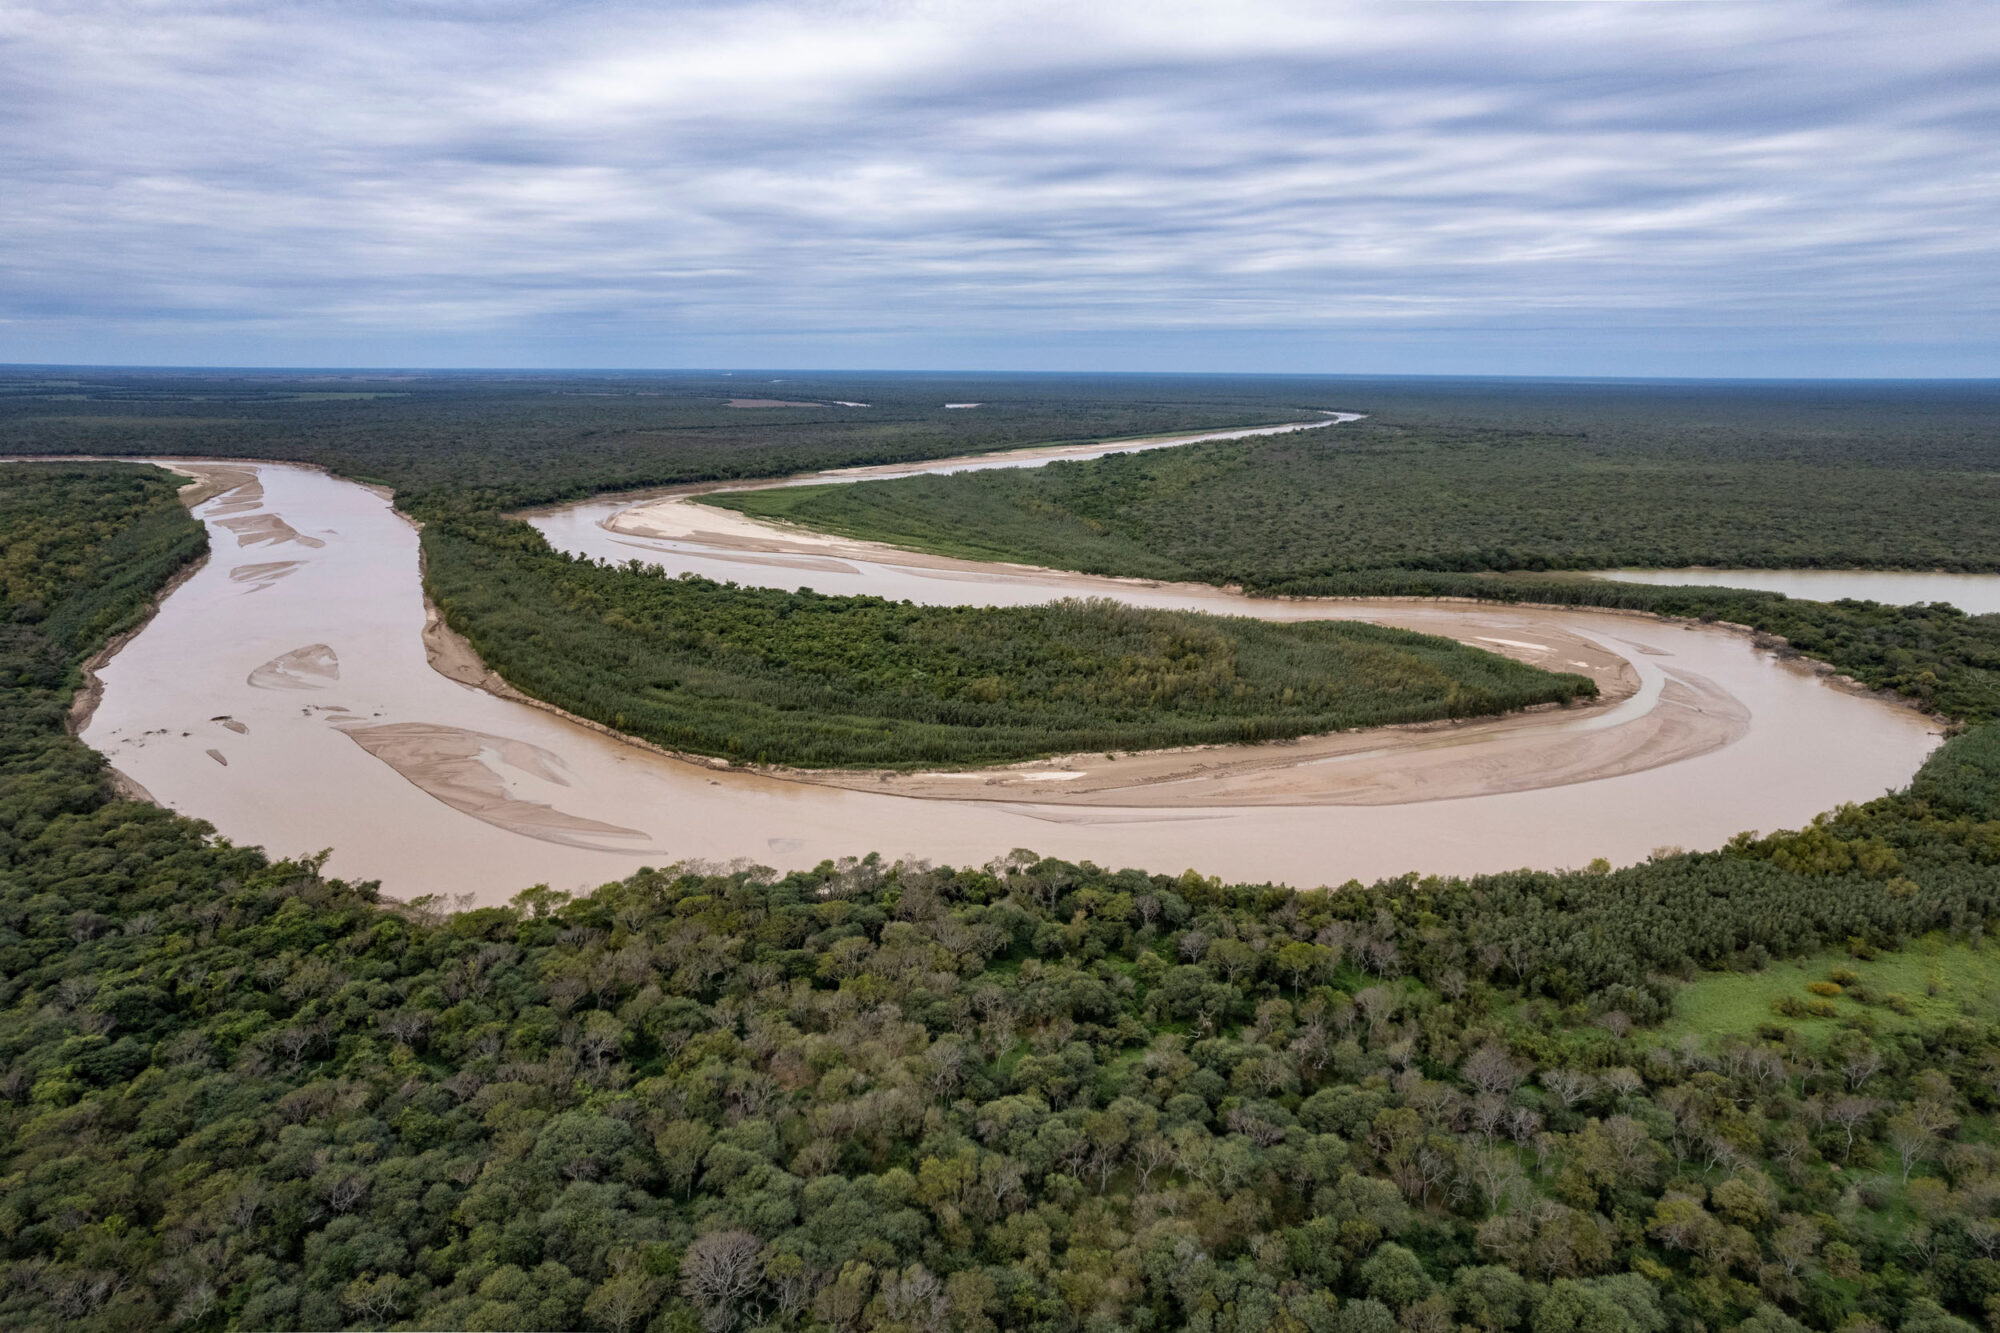 <p>The Bermejo River in the Gran Chaco, Argentina. A new land use proposal in the province of Chaco seeks to expand the areas where deforestation is allowed (Image © Martin Katz / Greenpeace)</p>